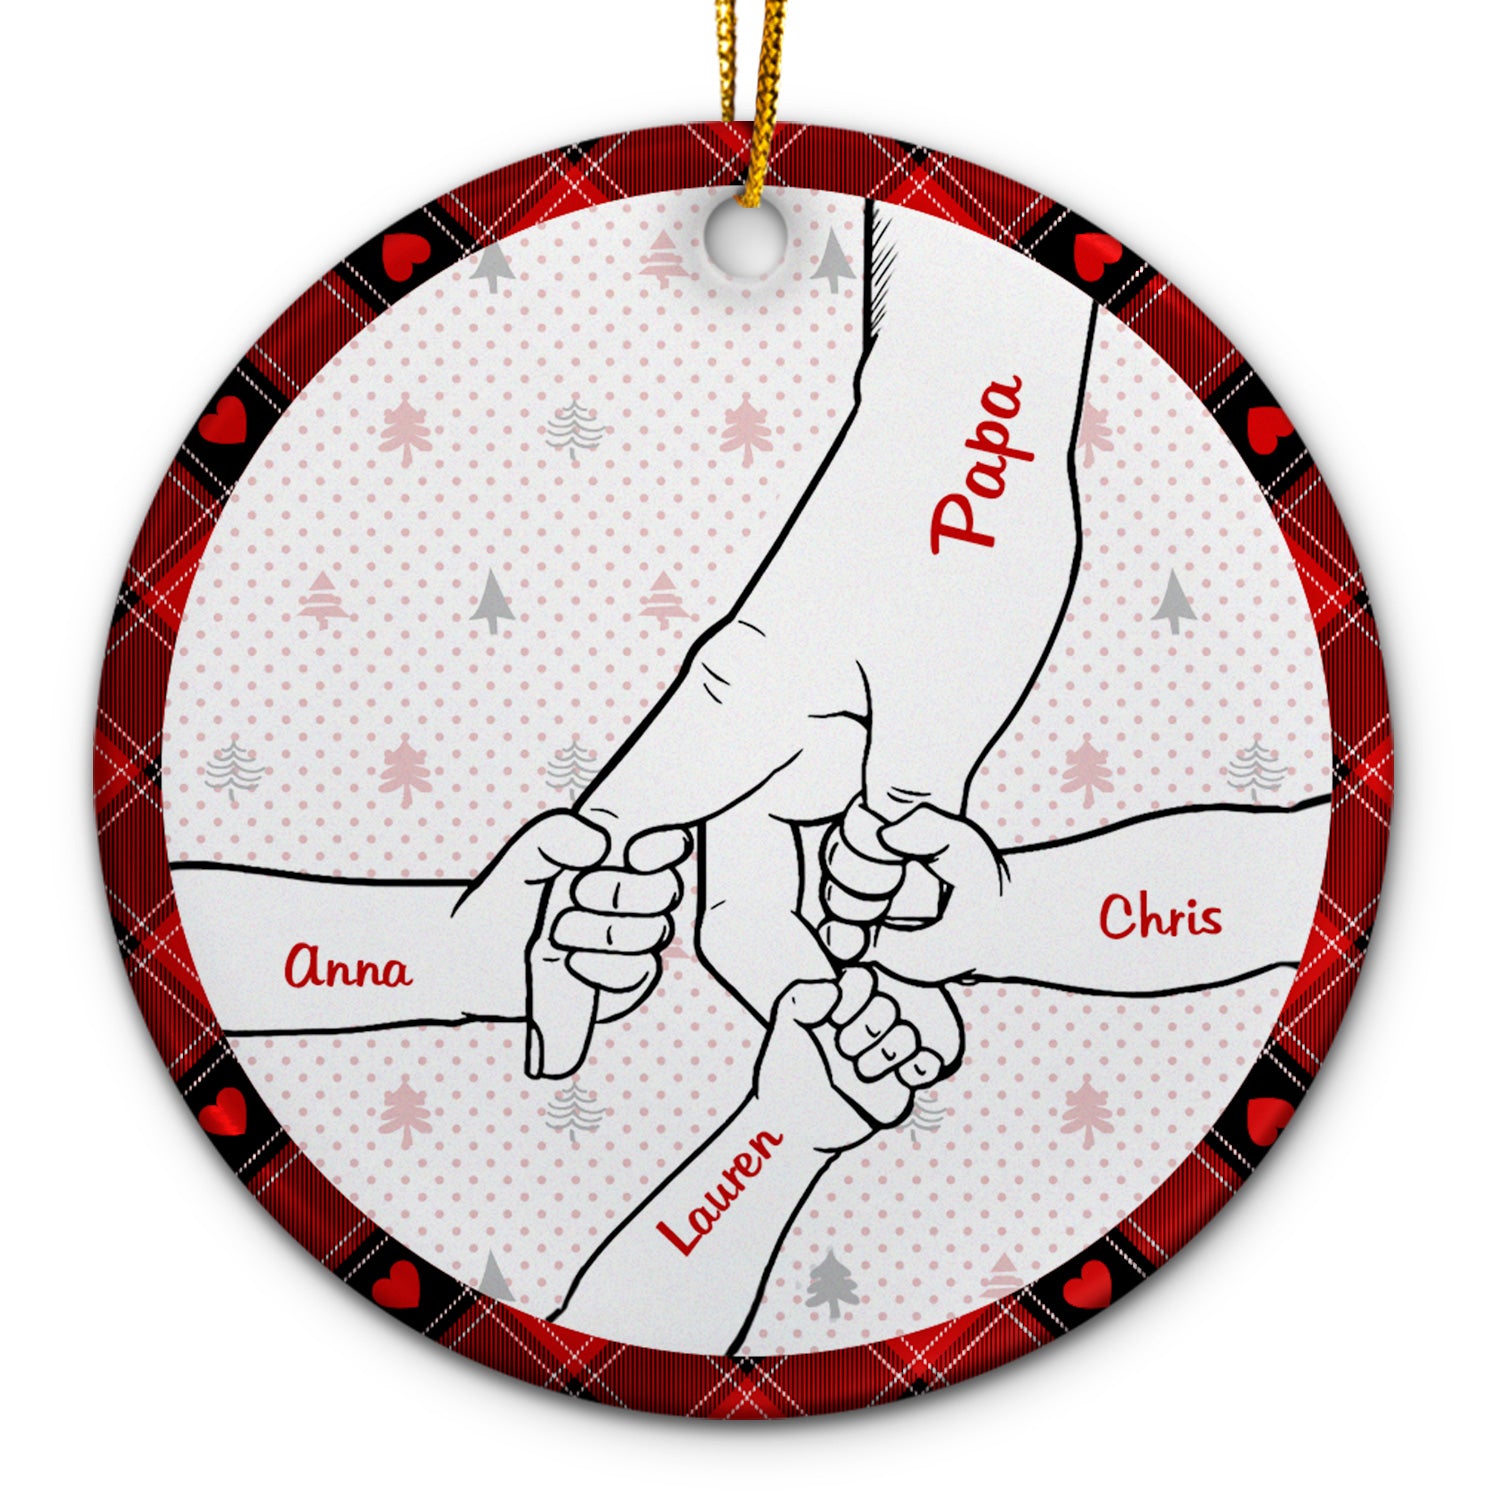 Hand In Hand, I Will Always Protect You - Christmas Gift For Parents, Grandparents - Personalized Circle Ceramic Ornament